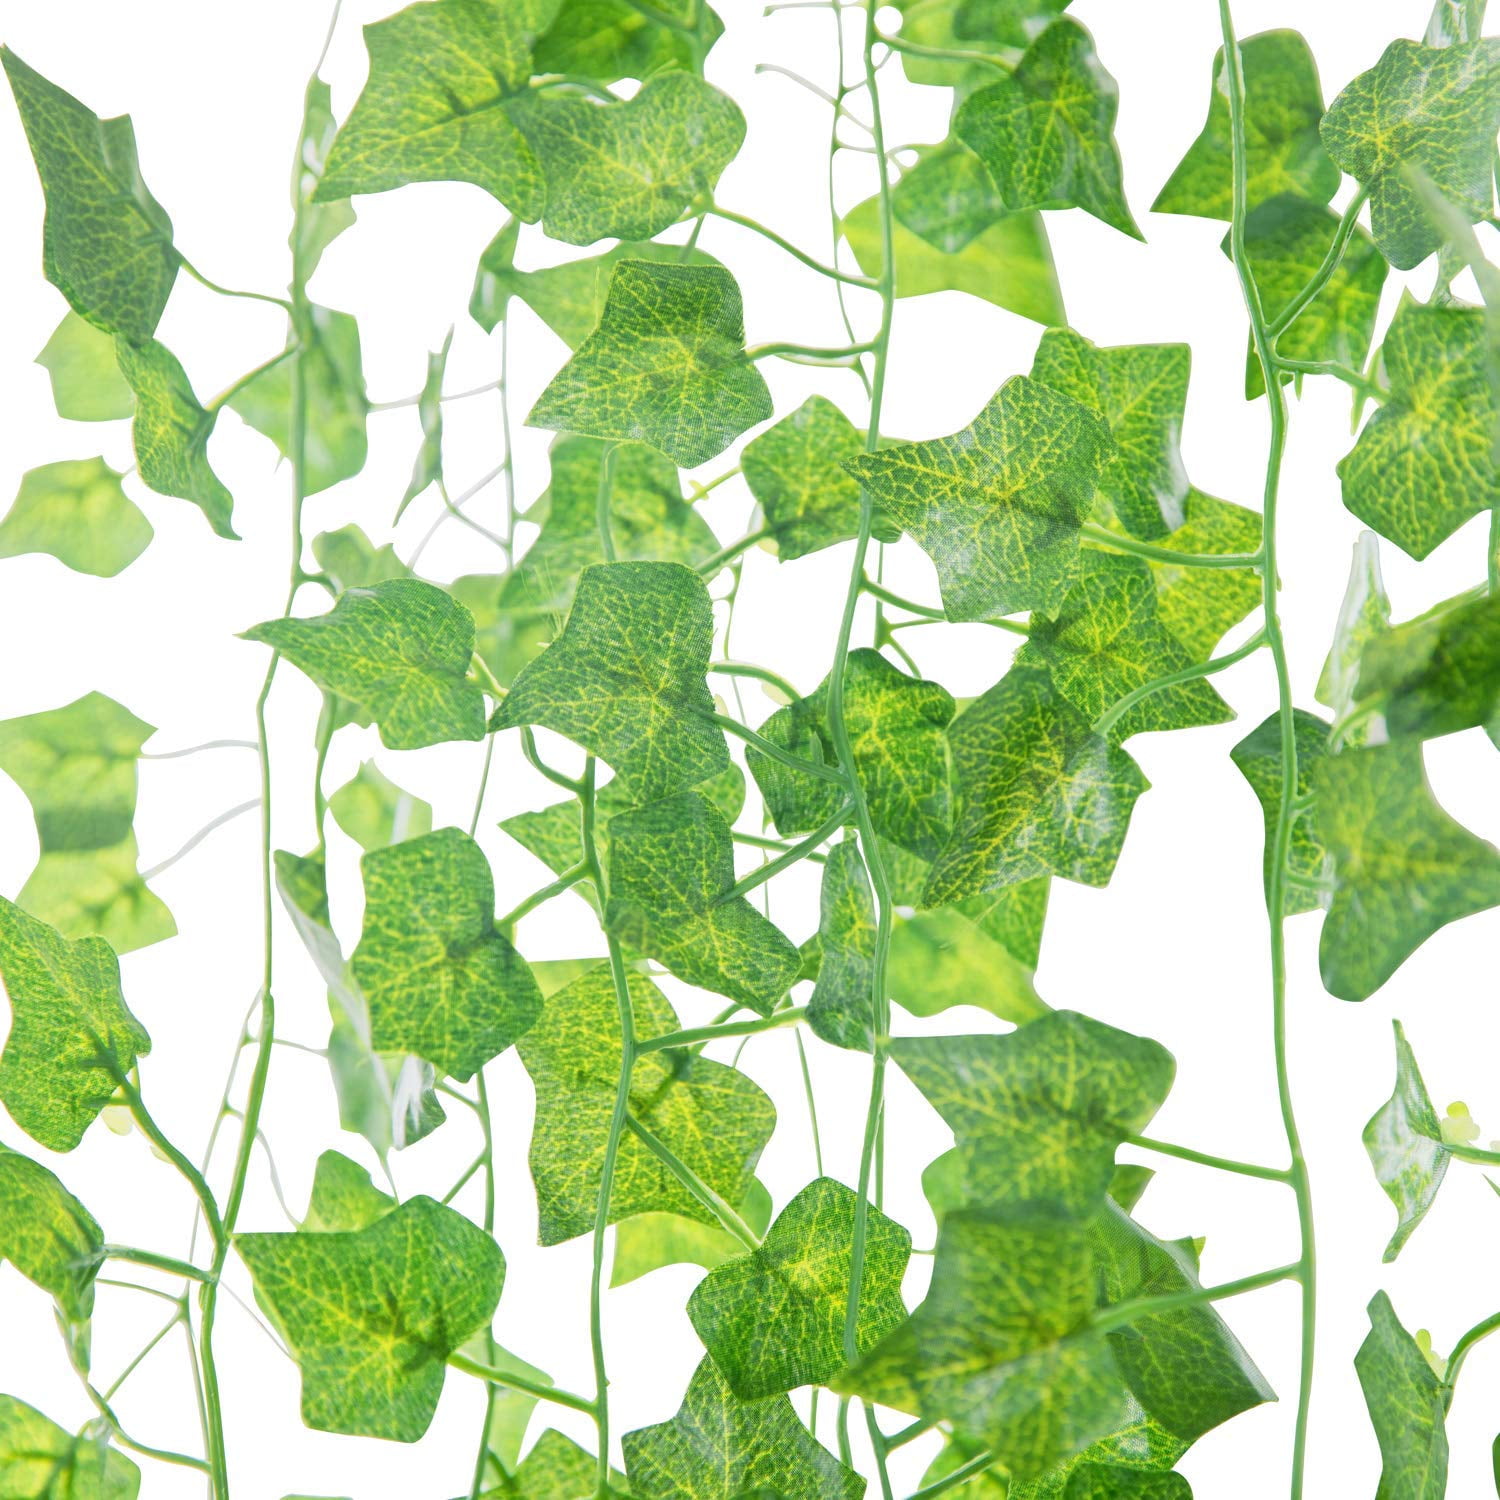 Fake Ivy Leaves 12pk. room decor garland Artificial Greenery vines for decor 